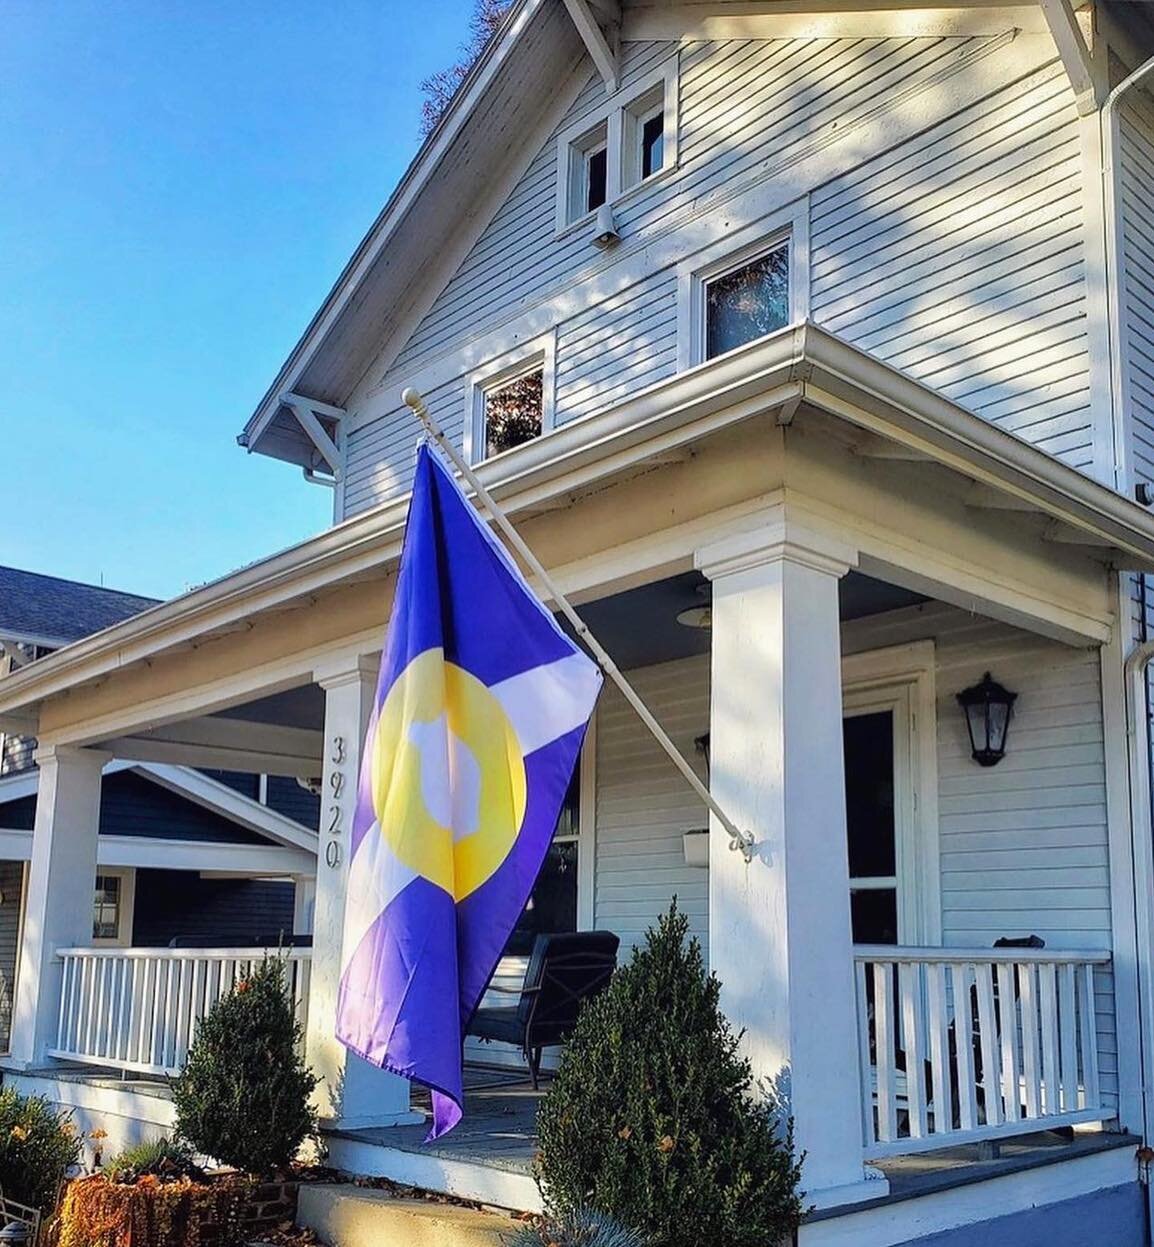 The Historic Southwood Park flag hangs proudly on neighbors' homes. Flags can be ordered online for $20.